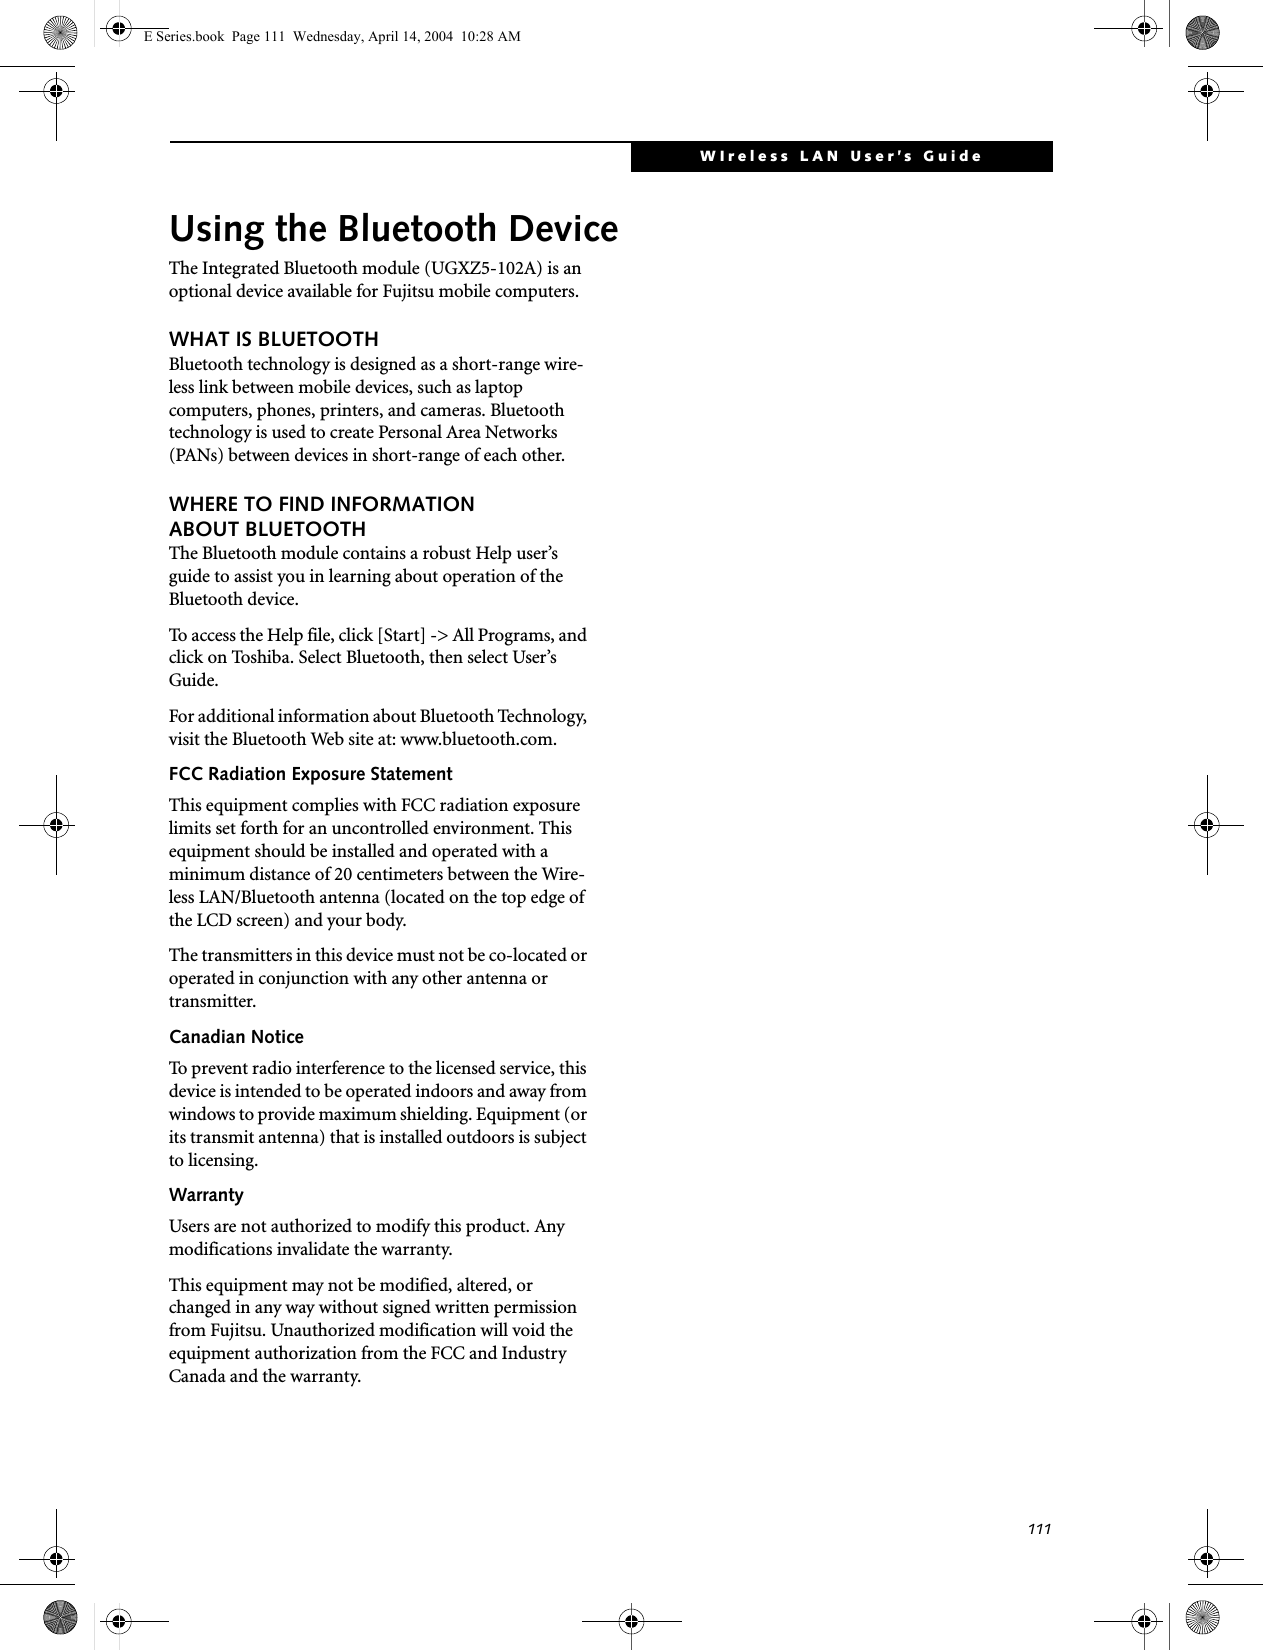 111WIreless LAN User’s Guide Using the Bluetooth DeviceThe Integrated Bluetooth module (UGXZ5-102A) is an optional device available for Fujitsu mobile computers. WHAT IS BLUETOOTHBluetooth technology is designed as a short-range wire-less link between mobile devices, such as laptop computers, phones, printers, and cameras. Bluetooth technology is used to create Personal Area Networks (PANs) between devices in short-range of each other. WHERE TO FIND INFORMATIONABOUT BLUETOOTHThe Bluetooth module contains a robust Help user’s guide to assist you in learning about operation of the Bluetooth device.To access the Help file, click [Start] -&gt; All Programs, and click on Toshiba. Select Bluetooth, then select User’s Guide.For additional information about Bluetooth Technology, visit the Bluetooth Web site at: www.bluetooth.com.FCC Radiation Exposure StatementThis equipment complies with FCC radiation exposure limits set forth for an uncontrolled environment. This equipment should be installed and operated with a minimum distance of 20 centimeters between the Wire-less LAN/Bluetooth antenna (located on the top edge of the LCD screen) and your body. The transmitters in this device must not be co-located or operated in conjunction with any other antenna or transmitter.Canadian NoticeTo prevent radio interference to the licensed service, this device is intended to be operated indoors and away from windows to provide maximum shielding. Equipment (or its transmit antenna) that is installed outdoors is subject to licensing.WarrantyUsers are not authorized to modify this product. Any modifications invalidate the warranty.This equipment may not be modified, altered, or changed in any way without signed written permission from Fujitsu. Unauthorized modification will void the equipment authorization from the FCC and Industry Canada and the warranty.E Series.book  Page 111  Wednesday, April 14, 2004  10:28 AM